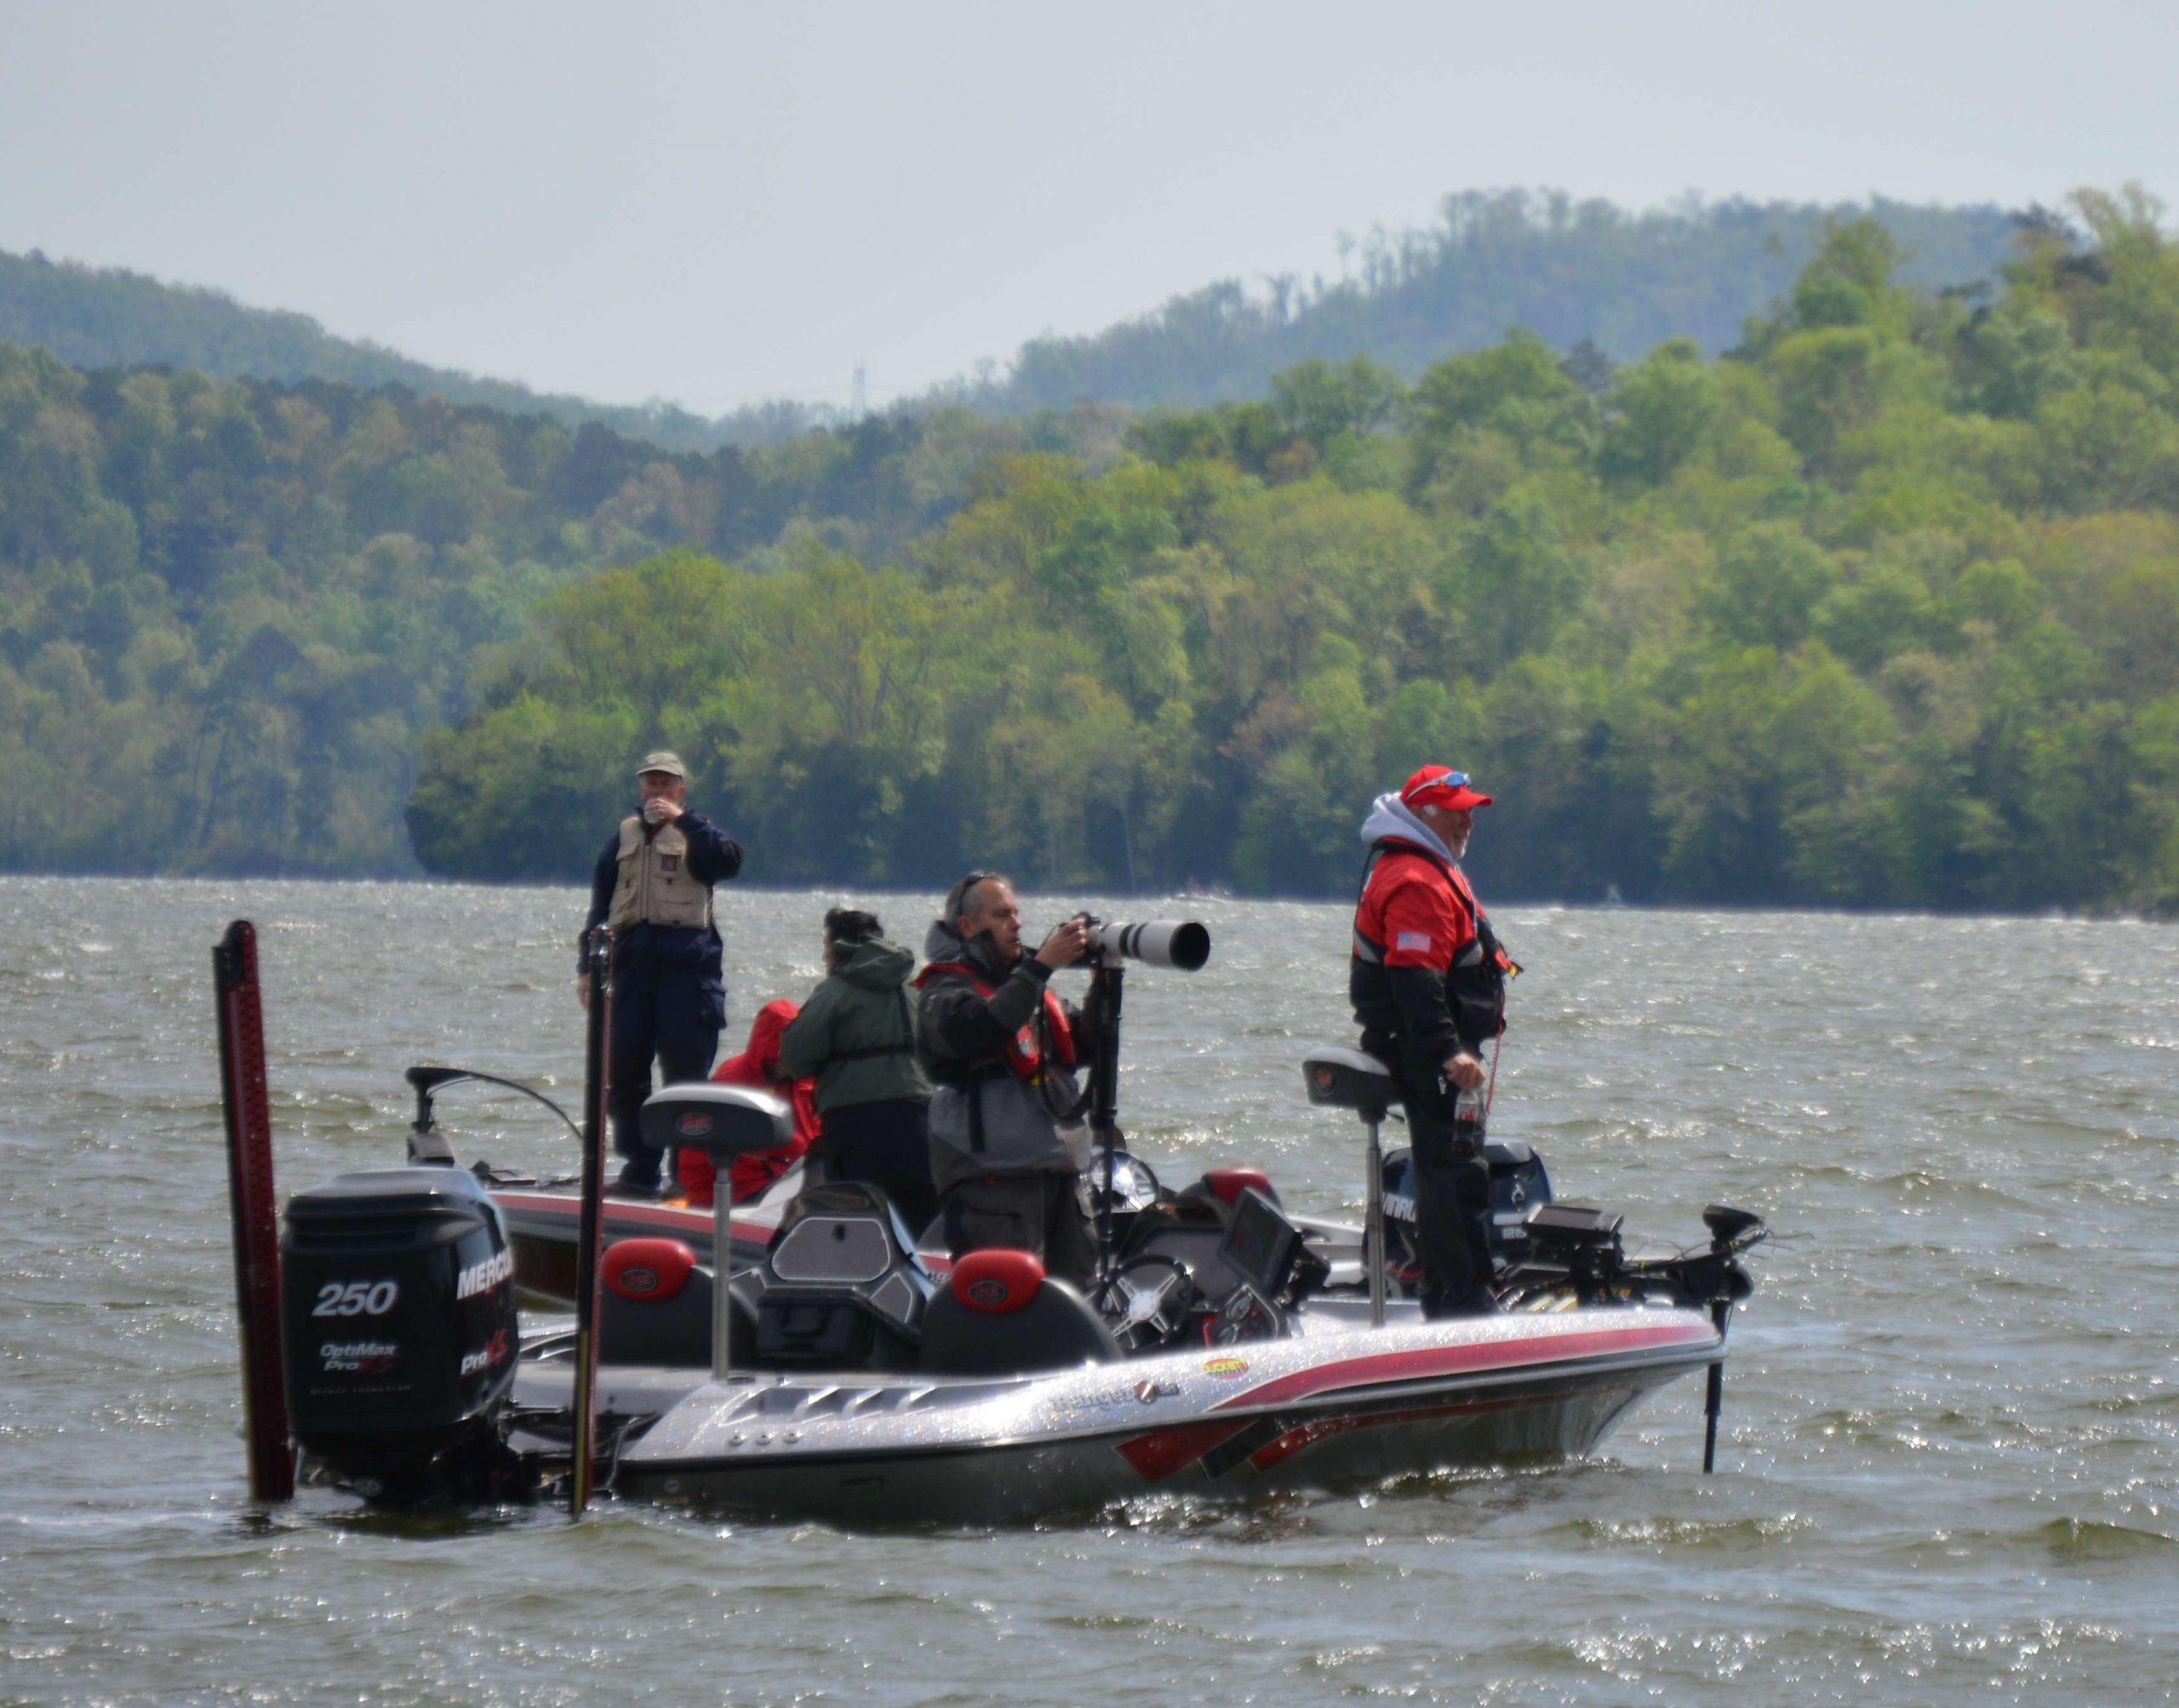 And Gary Tramontina was nearby taking long-lens photos for Bassmaster Magazine.